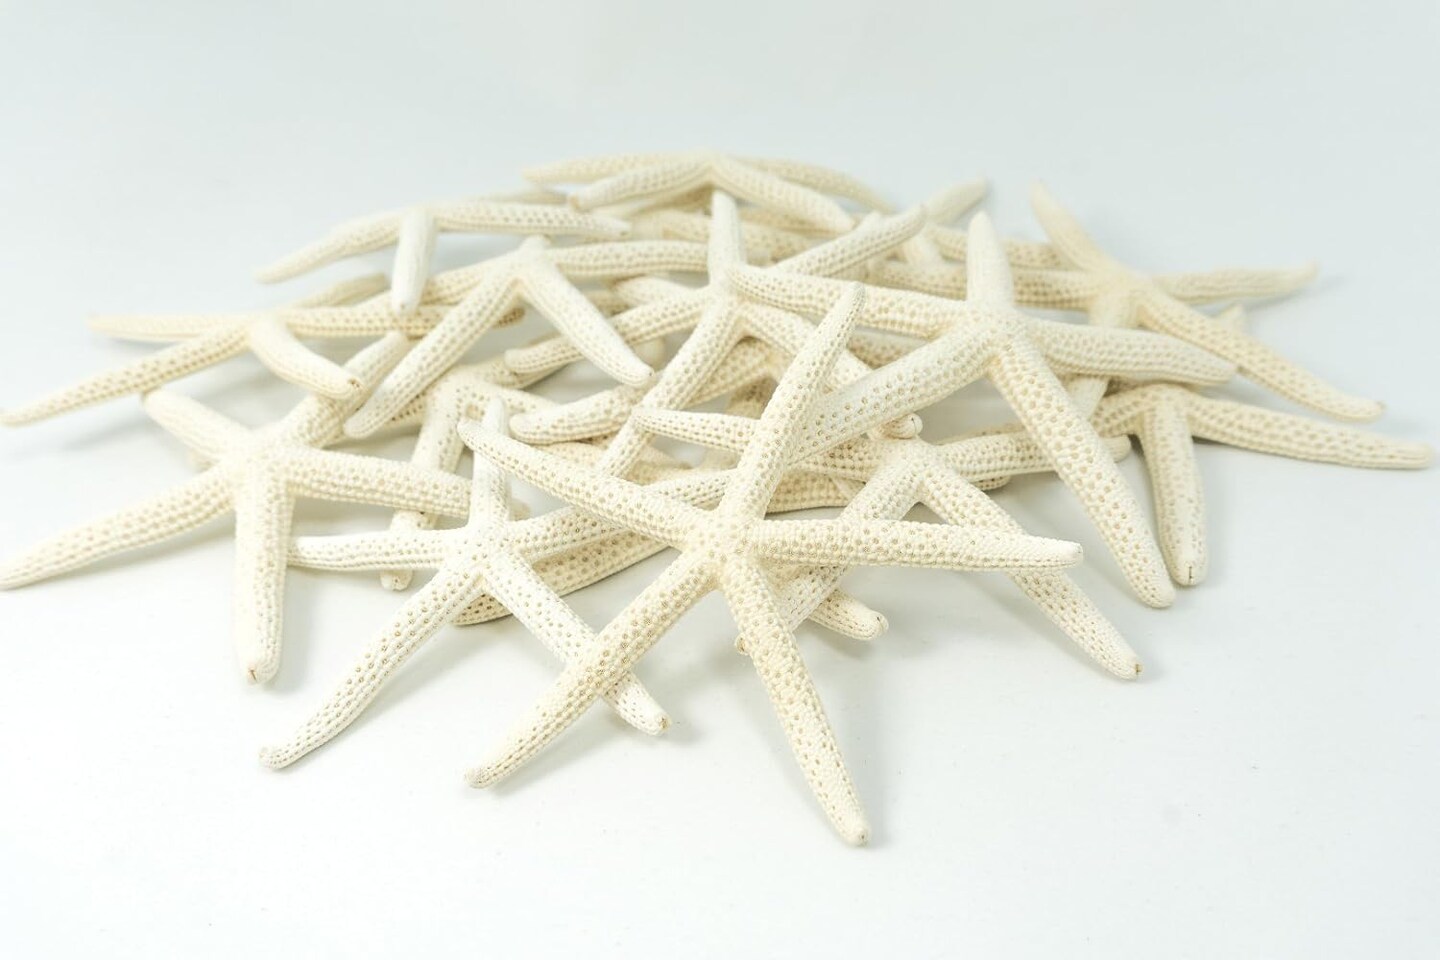 Starfish Decor - 3-4 Inch Star Fish (18) Pack - Starfish for Crafts - White Starfish Wall D&#xE9;cor - Beach Wedding Starfish - Beach Starfish D&#xE9;cor - Star fish Decorations - Shells for Decoration